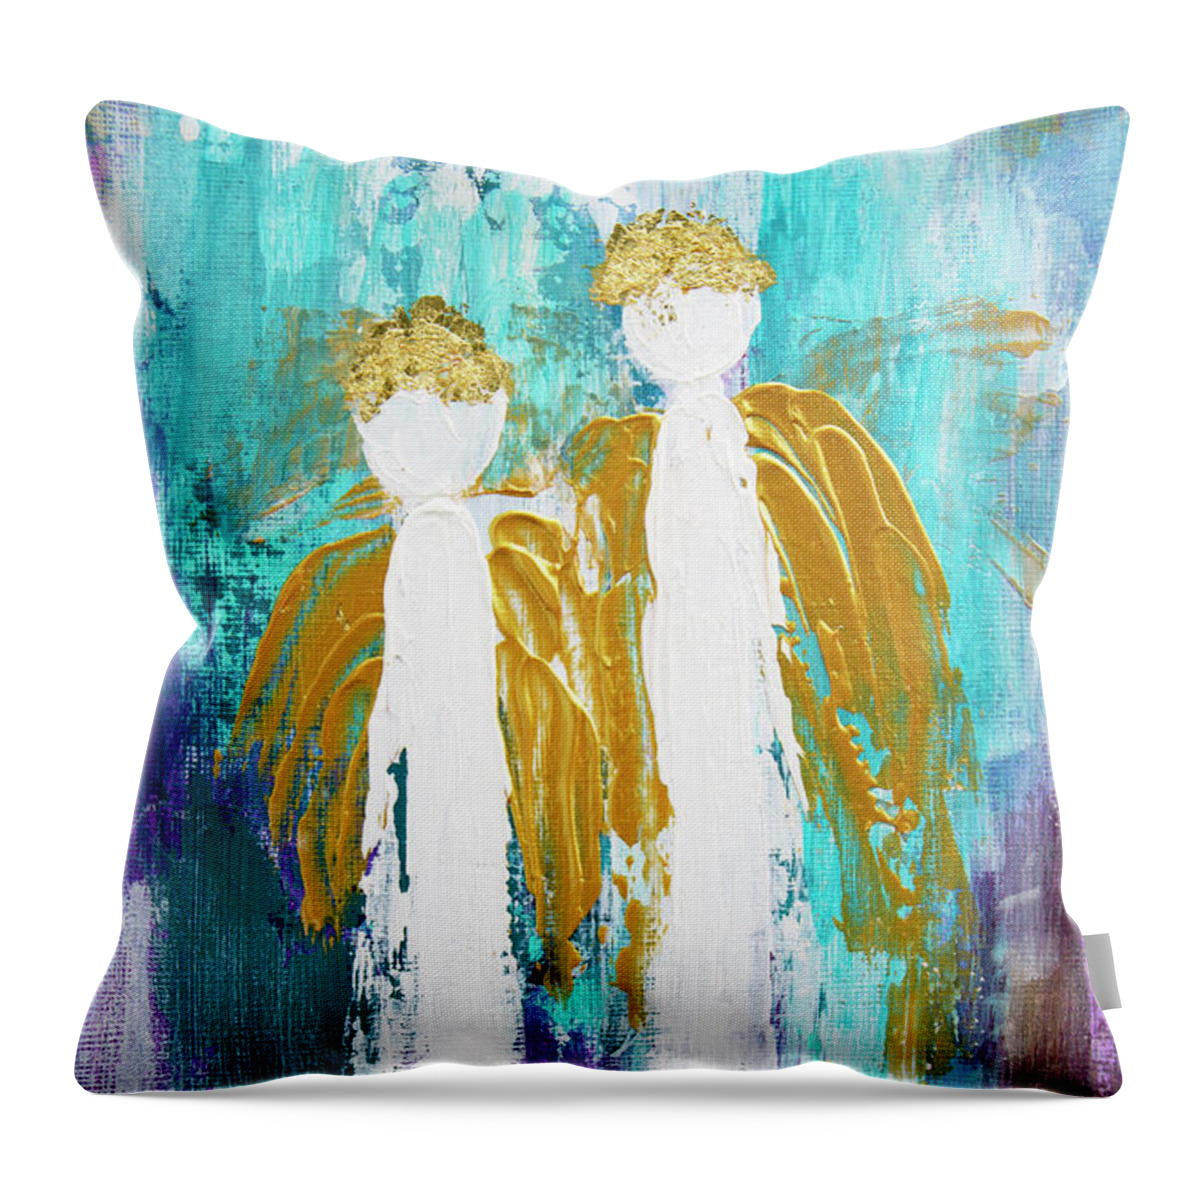 Acrylic Throw Pillow featuring the painting Angelic Friendship by Linh Nguyen-Ng